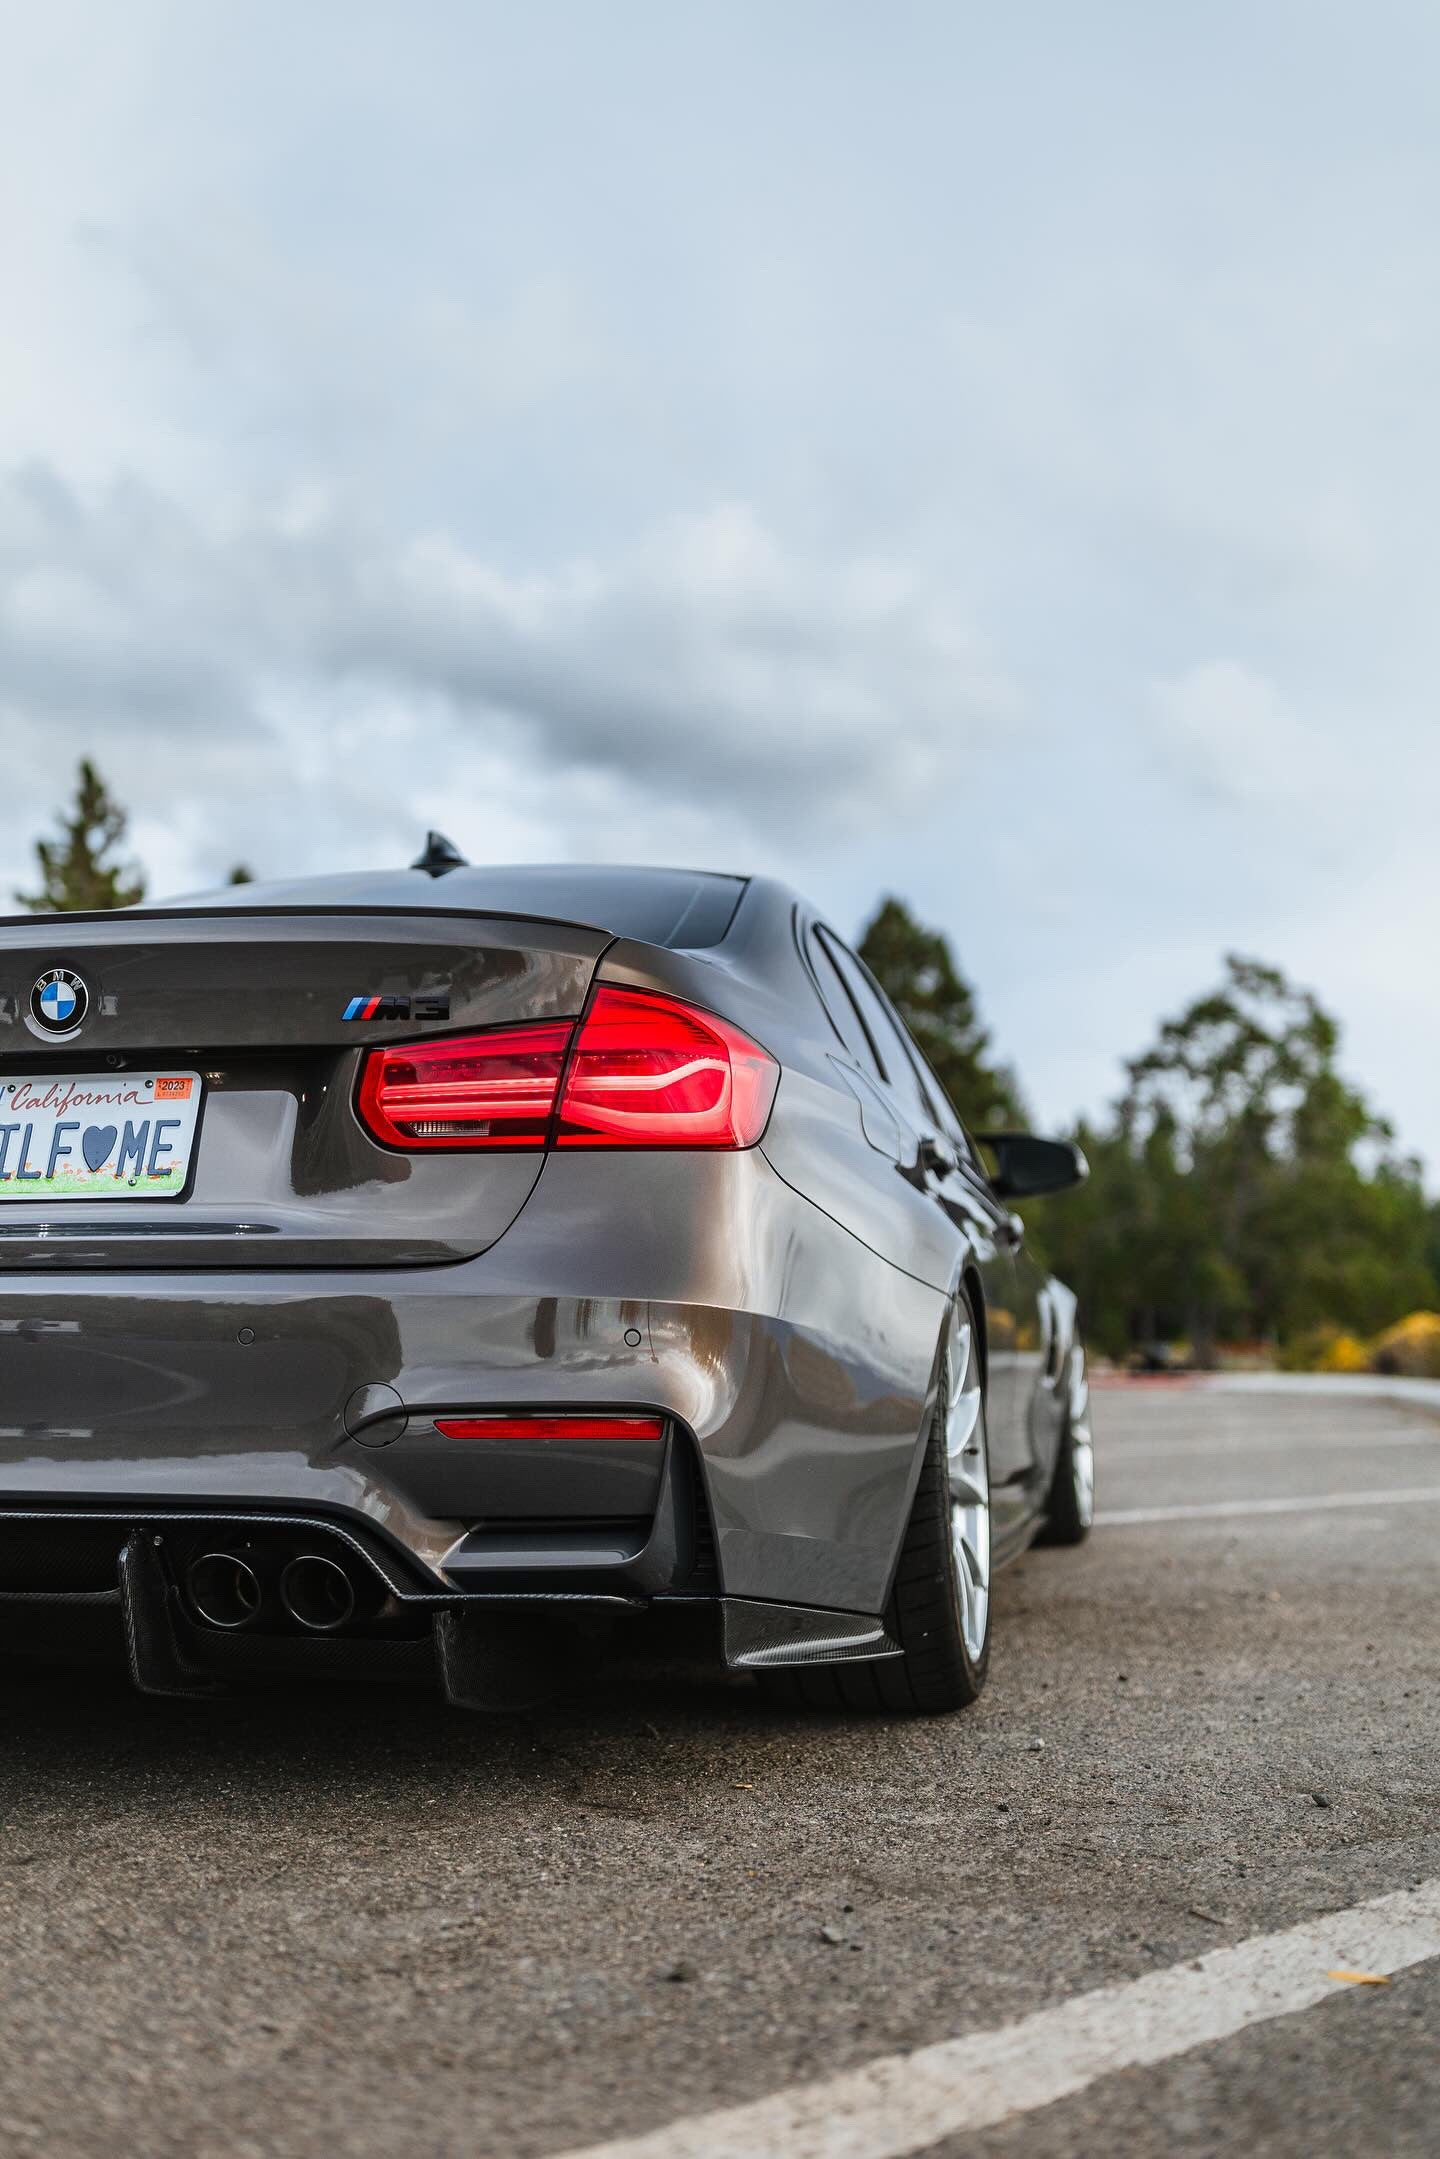 F80 M3 & F30 3 series Sequential Euro LCI style taillights (fits both pre-LCI and LCI)